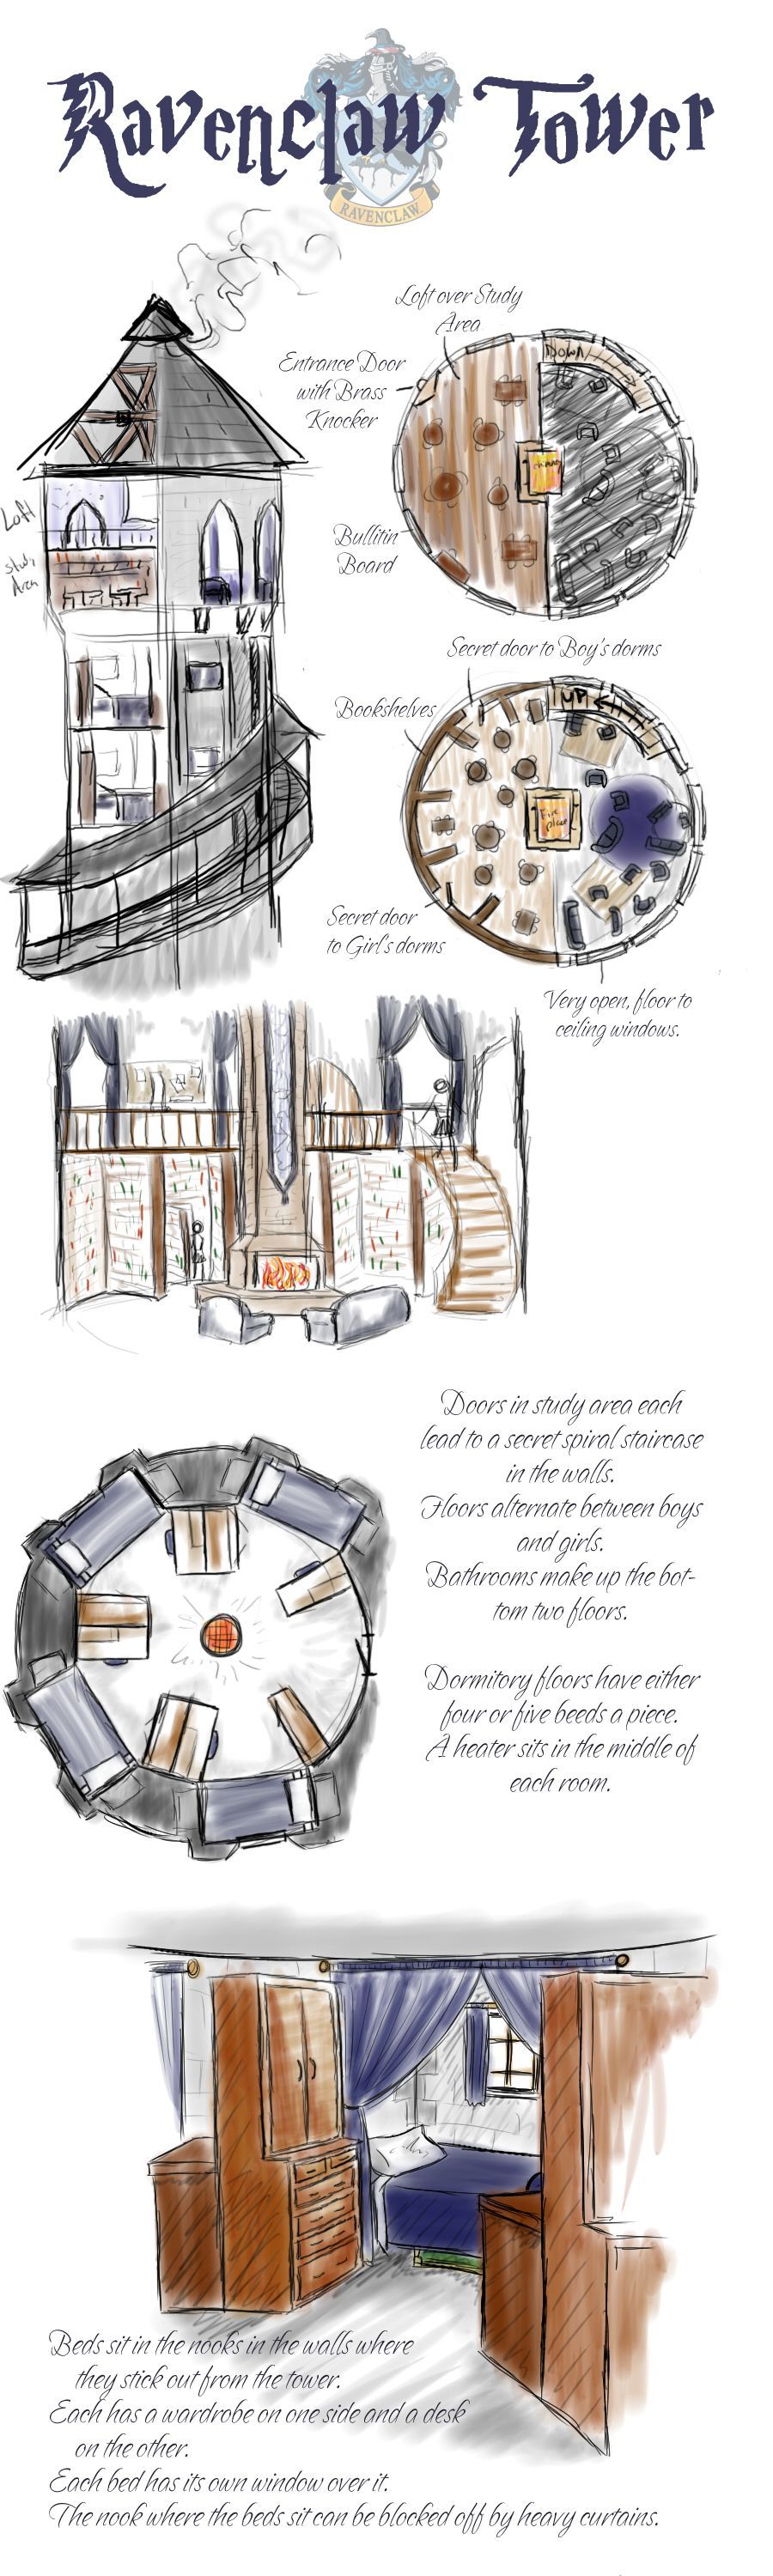 My Pottermore house… Ravenclaw Tower by *Whisperwings on deviantART there are drawings of all of the Hogwarts houses. Super